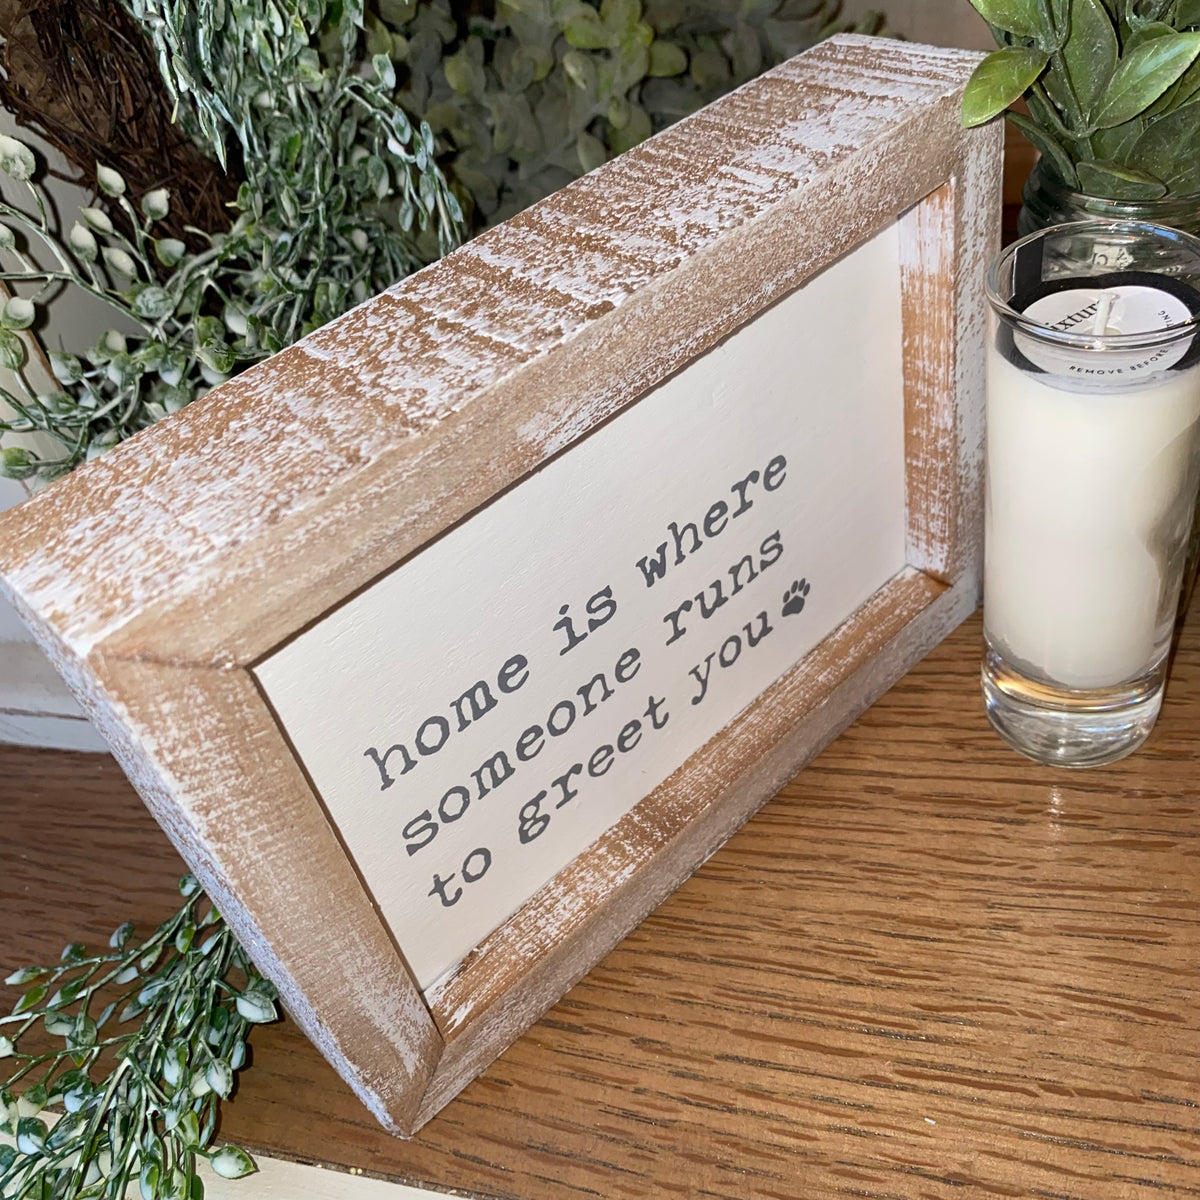 Home is Where Someone Runs to Greet You {Gift Box}